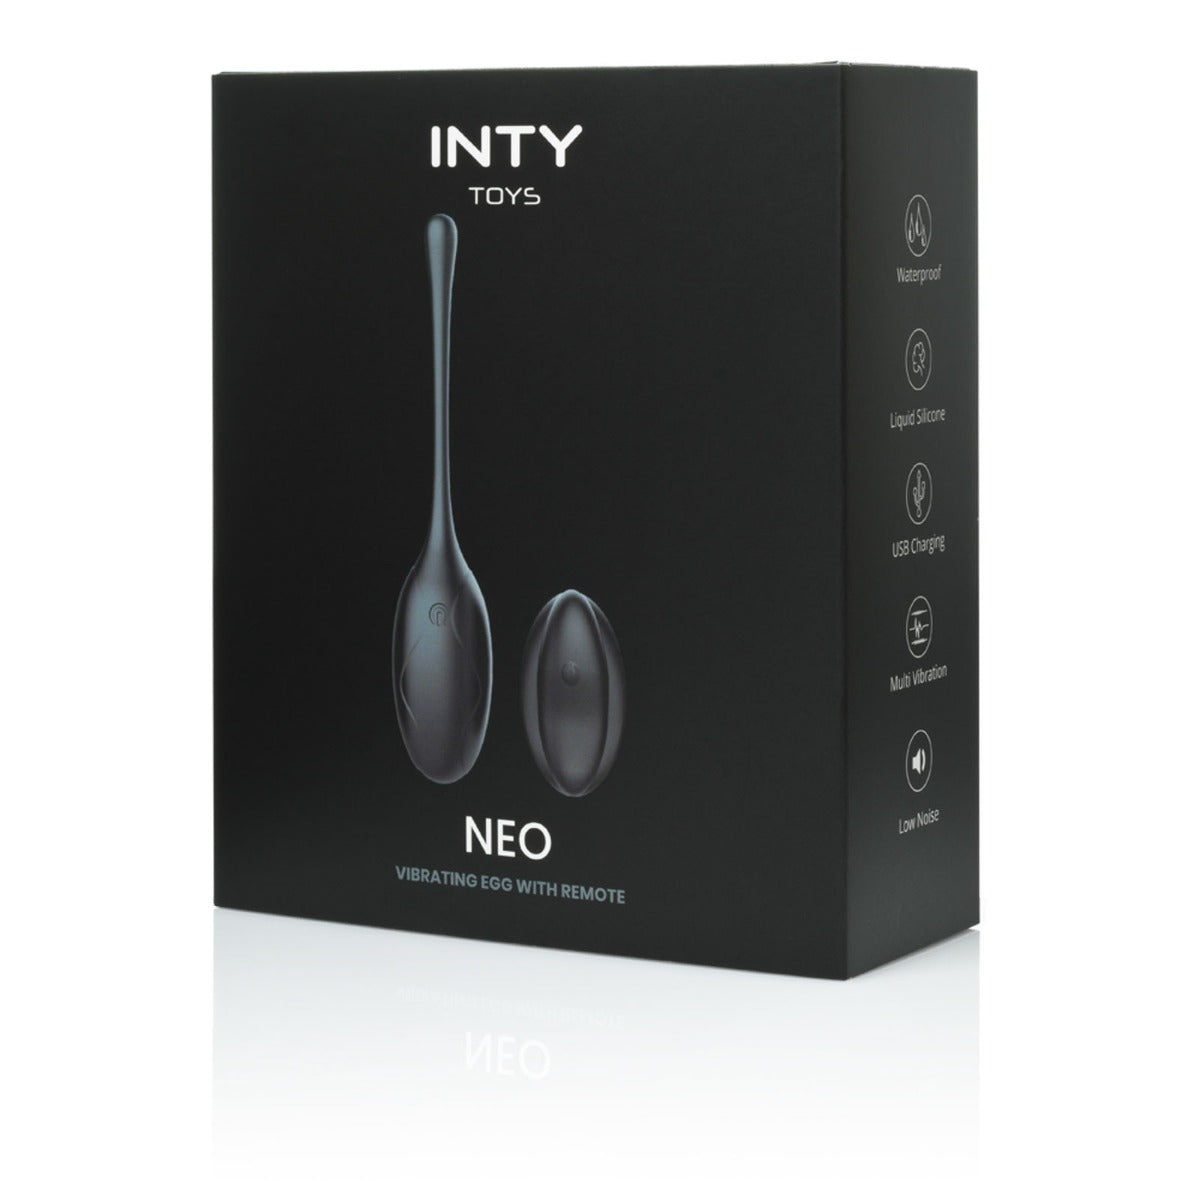 INTY Toys | NEO Vibrating Egg with Remote - Black